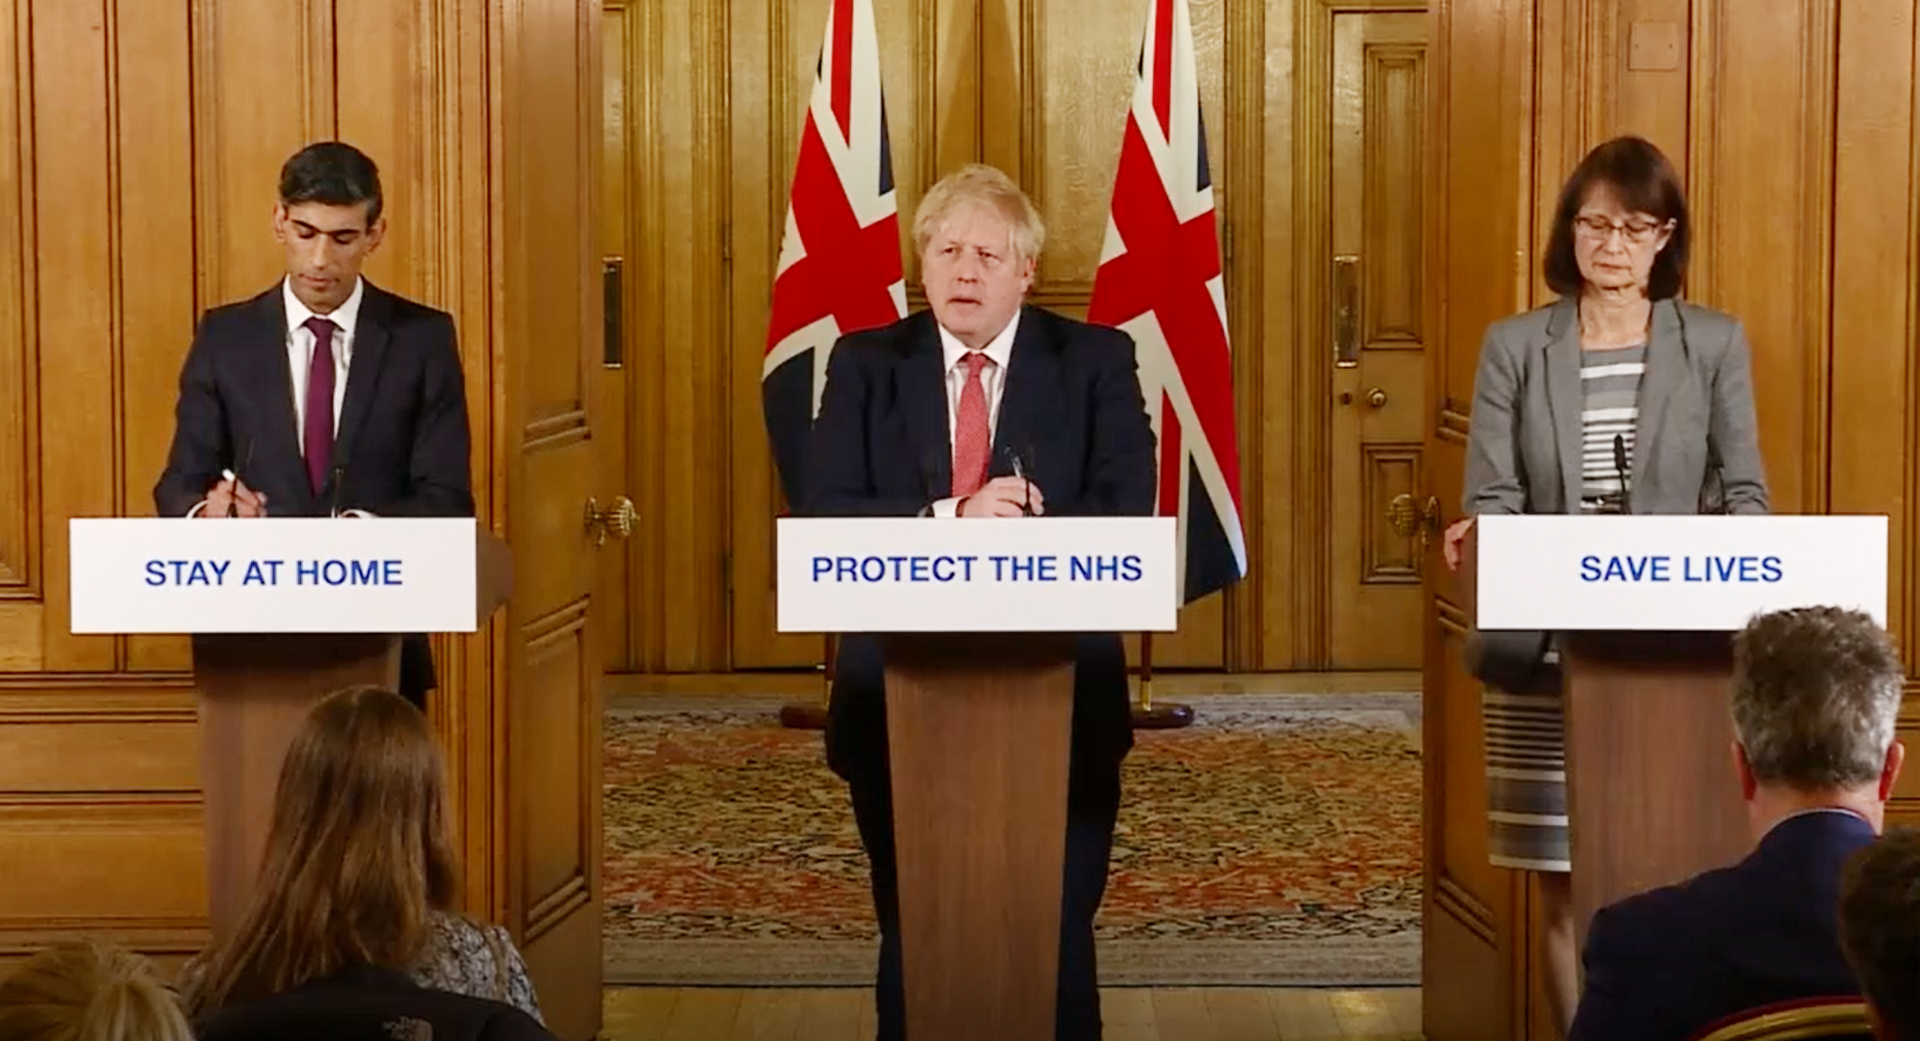 A screen-grab of Prime Minister Boris Johnson (centre), Chancellor Rishi Sunak (left) and Dr Jenny Harries (right) speaking at a media briefing in Downing Street, London, on coronavirus (COVID-19).